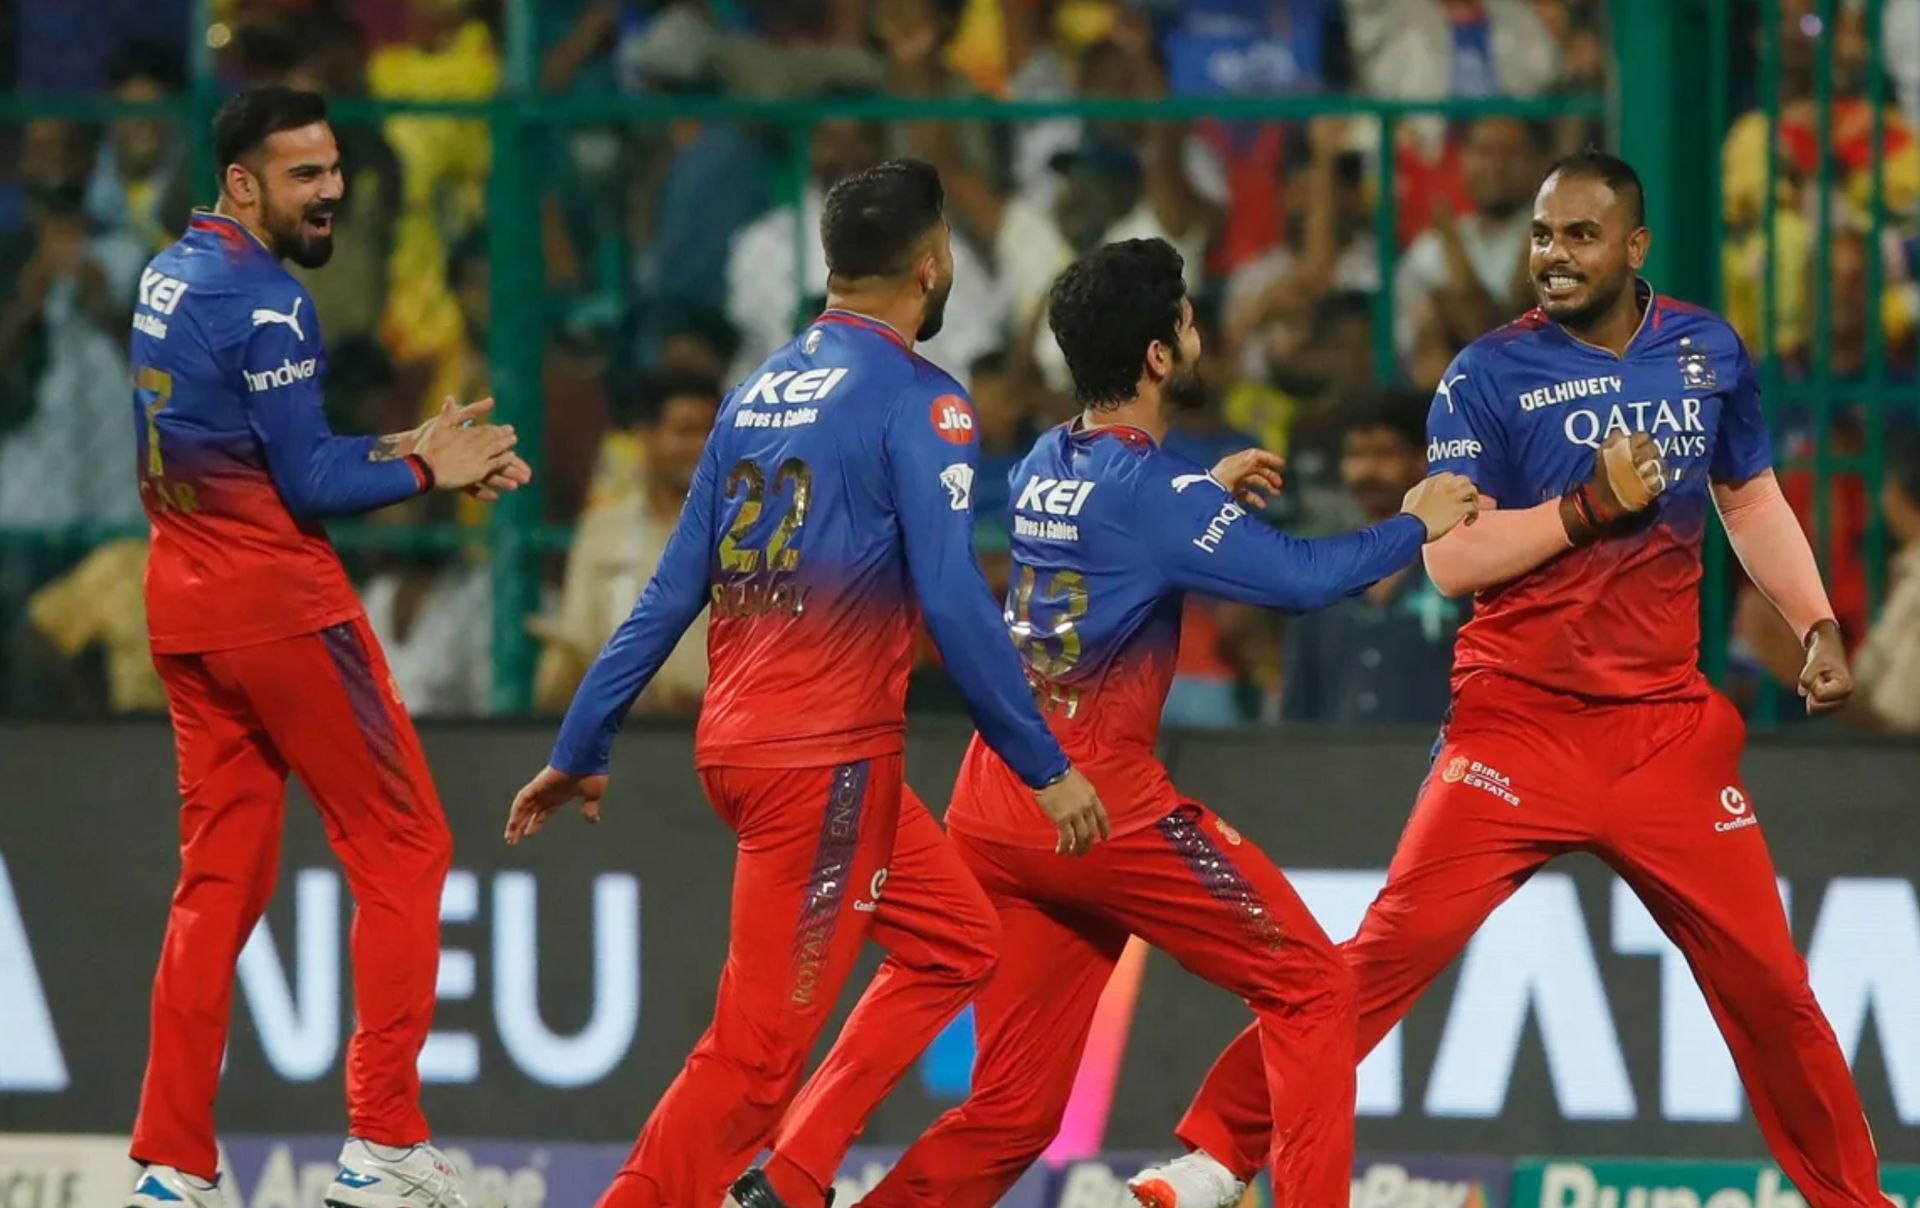 Yash Dayal celebrating with his teammates after win against CSK. (PC: BCCI)